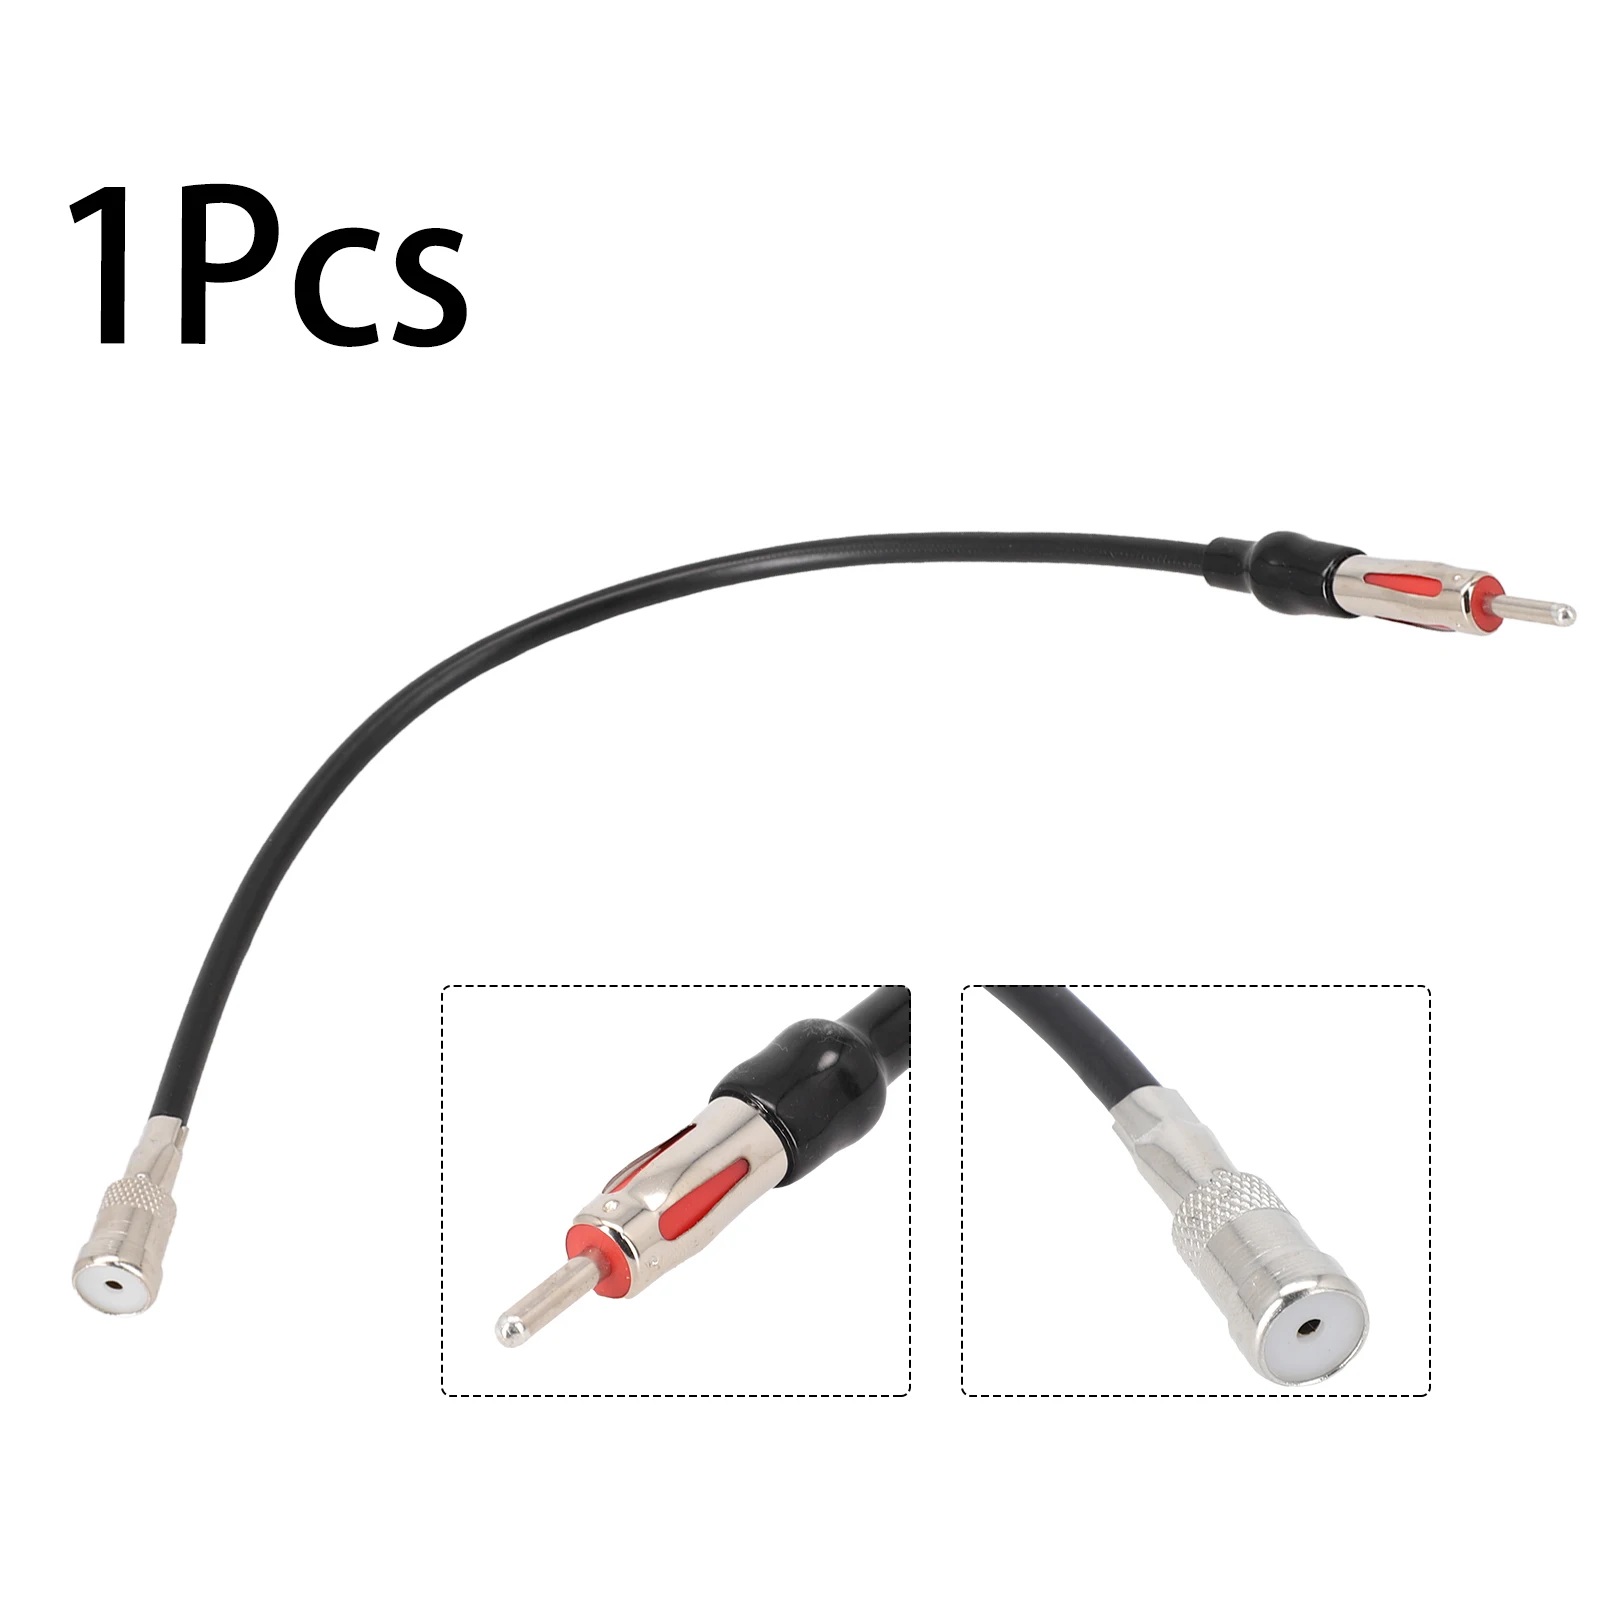 1 X Car Stereo Antenna Adapter ISO To DIN Cable Truck Player Stereo Antenna Adapter Radio Converter Cable FM AM Radio Tools